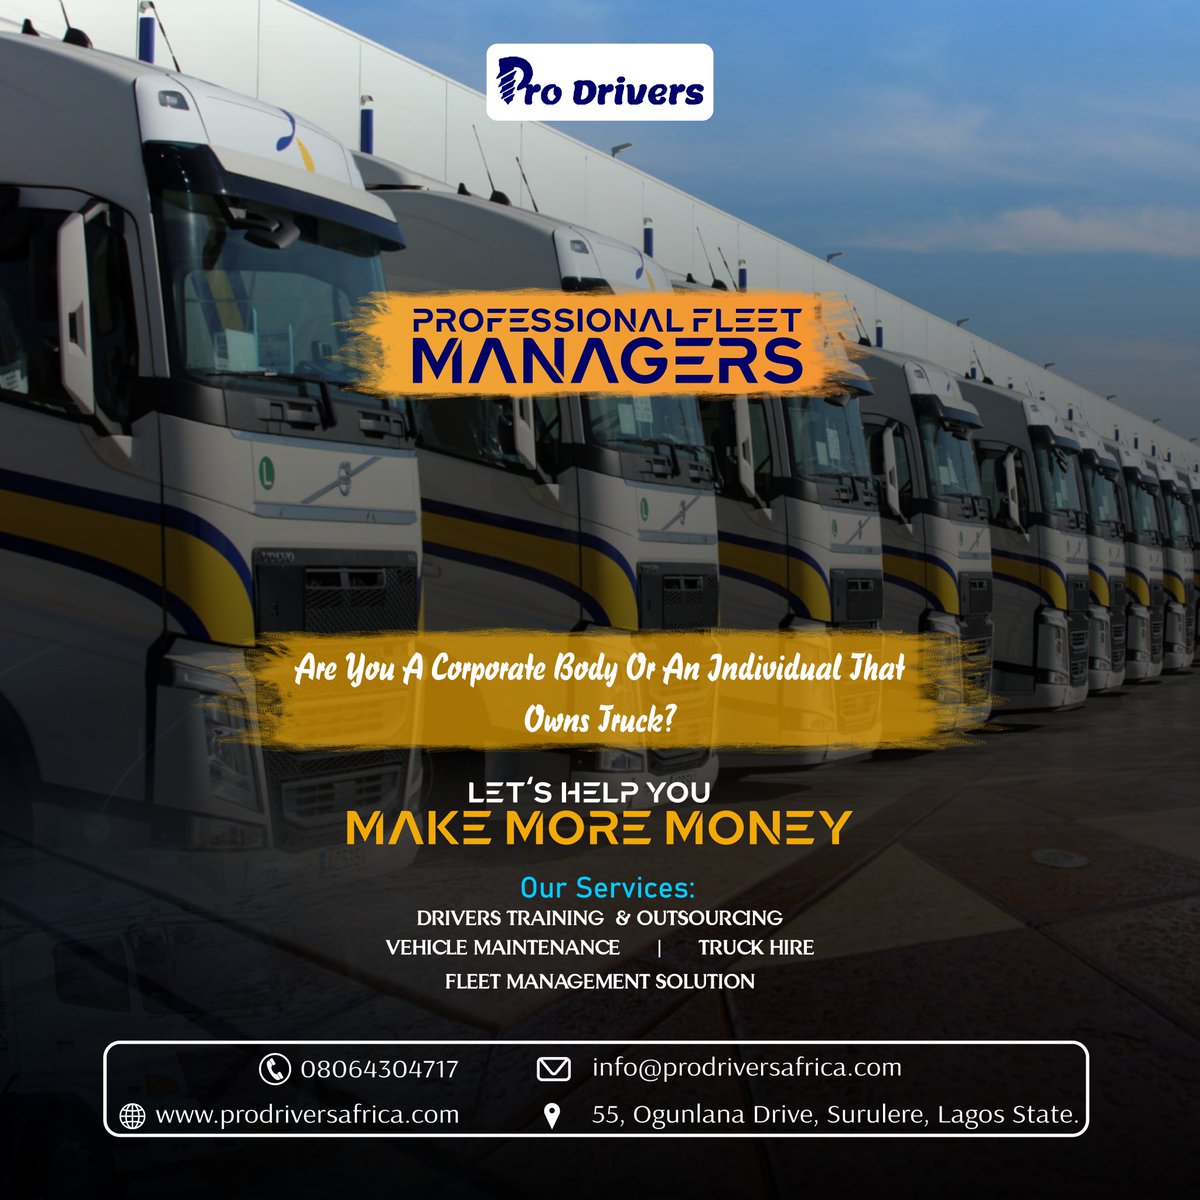 Are you a corporate body or an individual that owns a truck? Let us help you make more money. . .
.
.
.
.
.
.
.
.
#truck #transportation #logistics #fleetmanagement #drivers #training #outsourcing #outsourcingservices #Angela #Soso #ebubu #Barca #Deborah